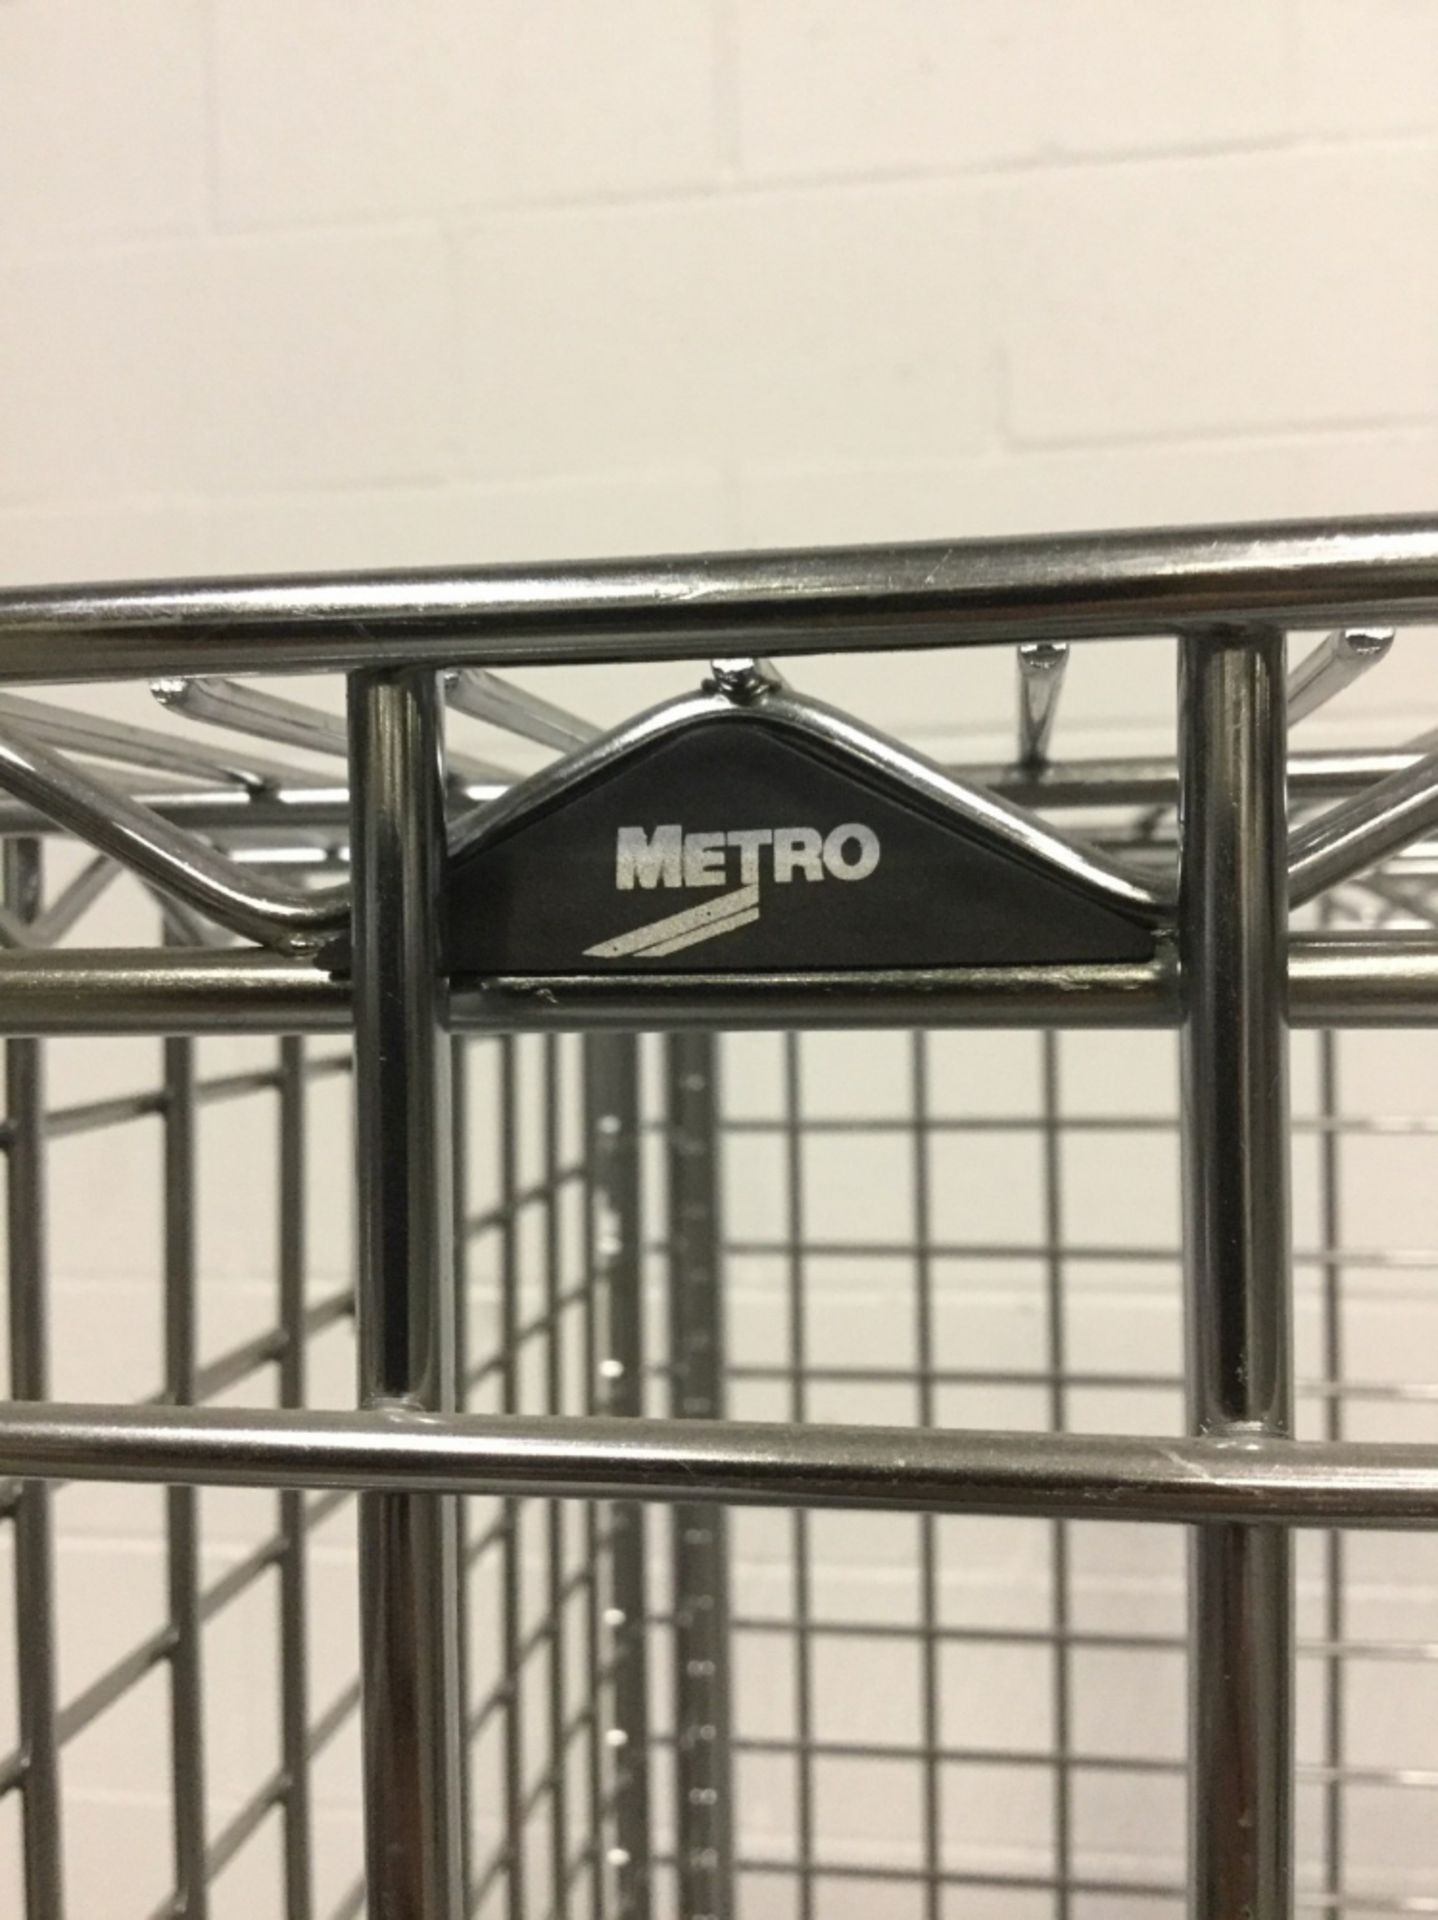 5' Stainless Steel Metro Rack with Caging - Image 2 of 2